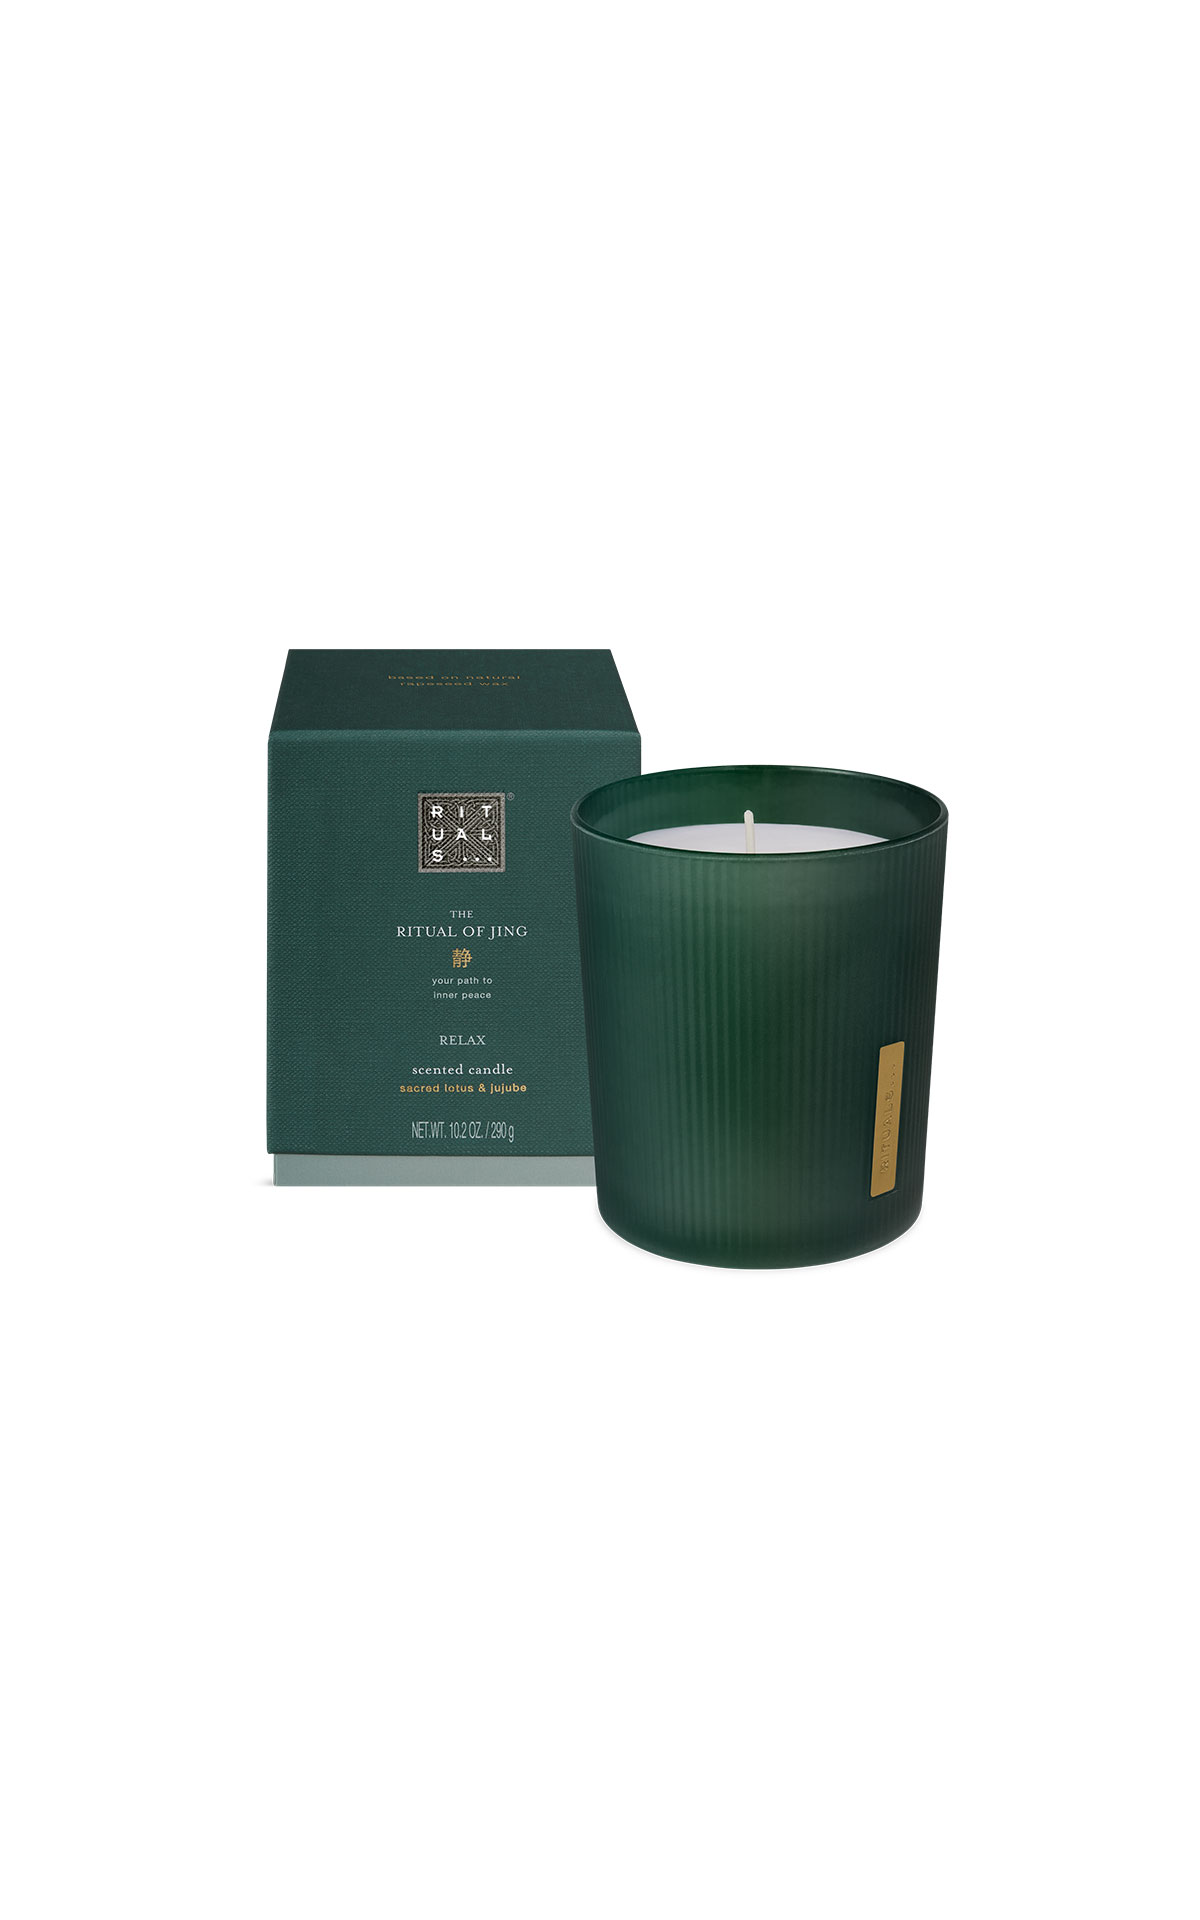 Rituals Jing candle from Bicester Village